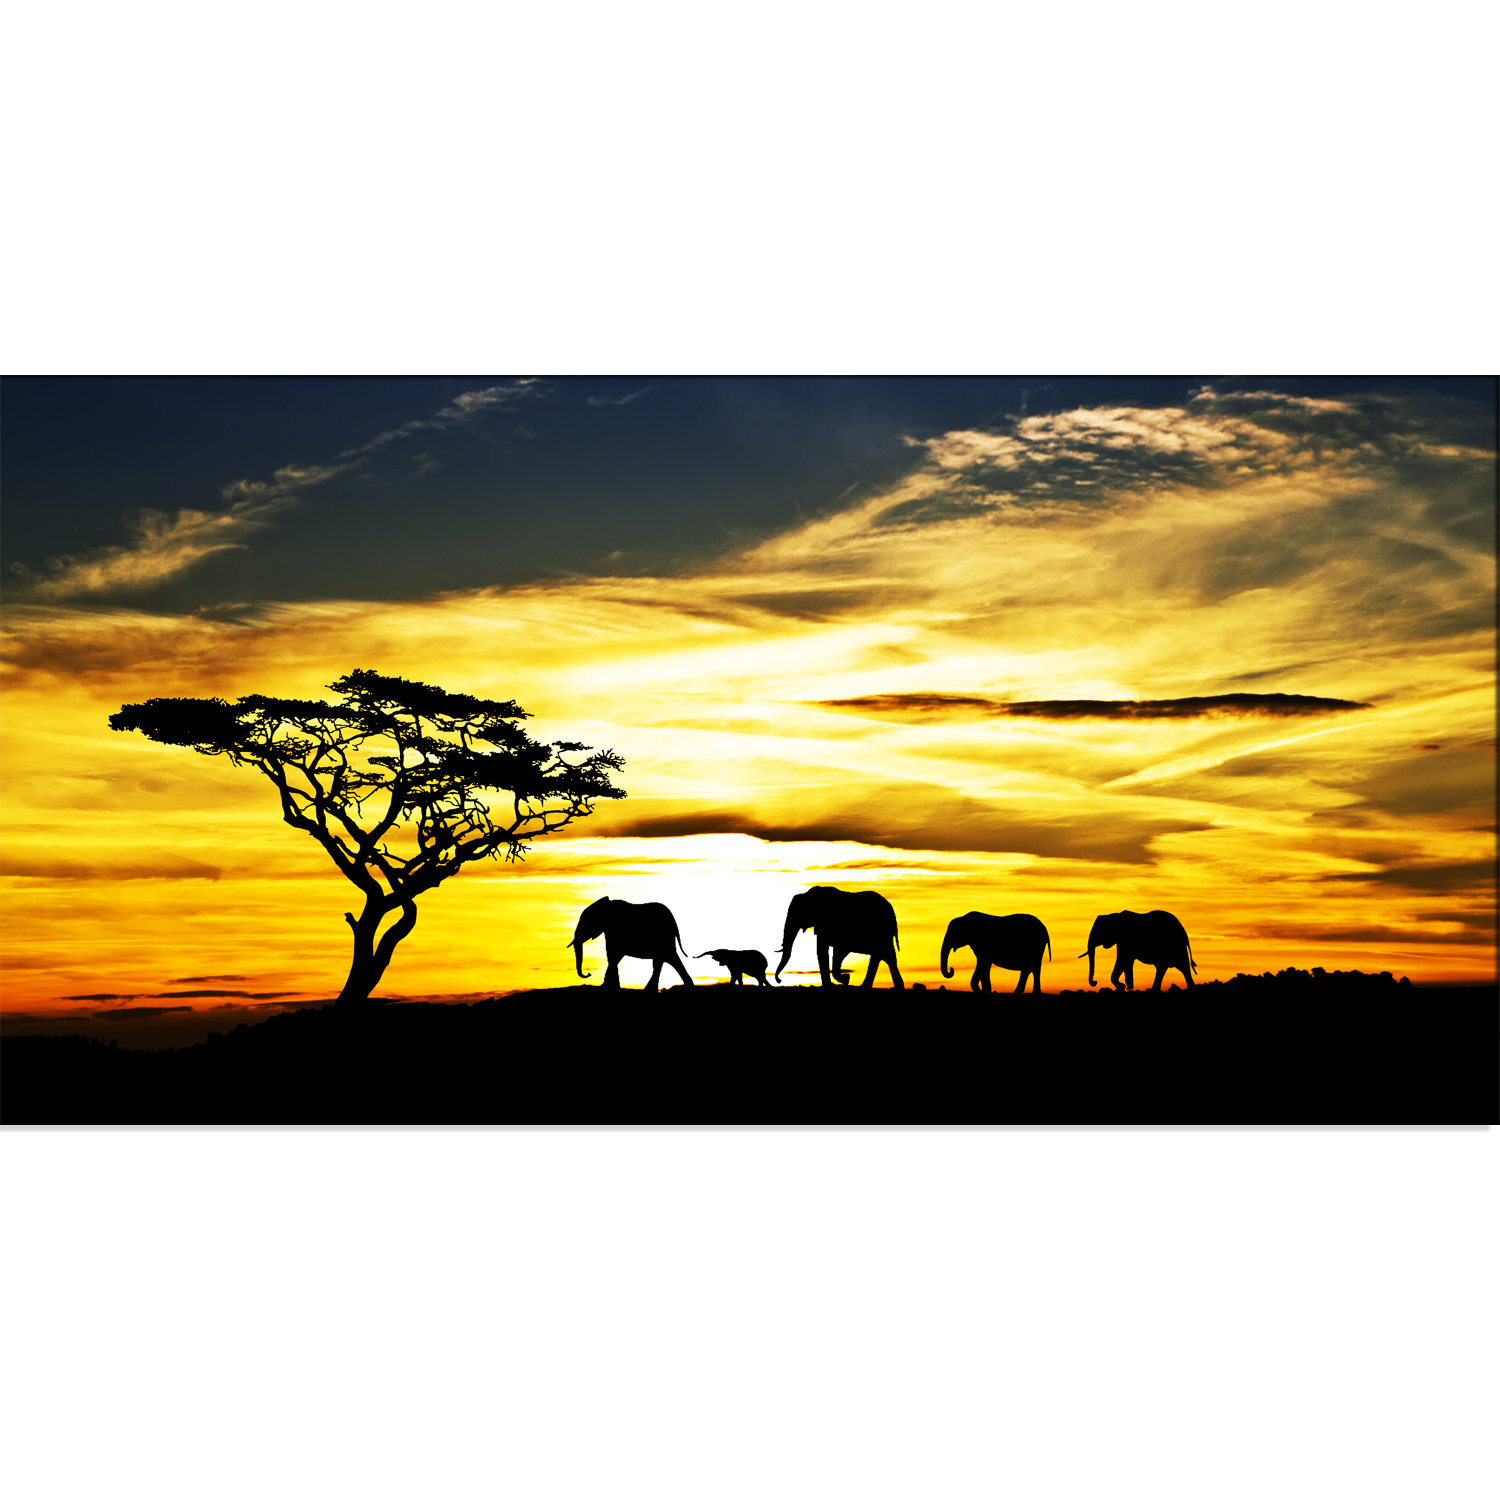 Elephant Family With Sunset Canvas Print Wall Painting